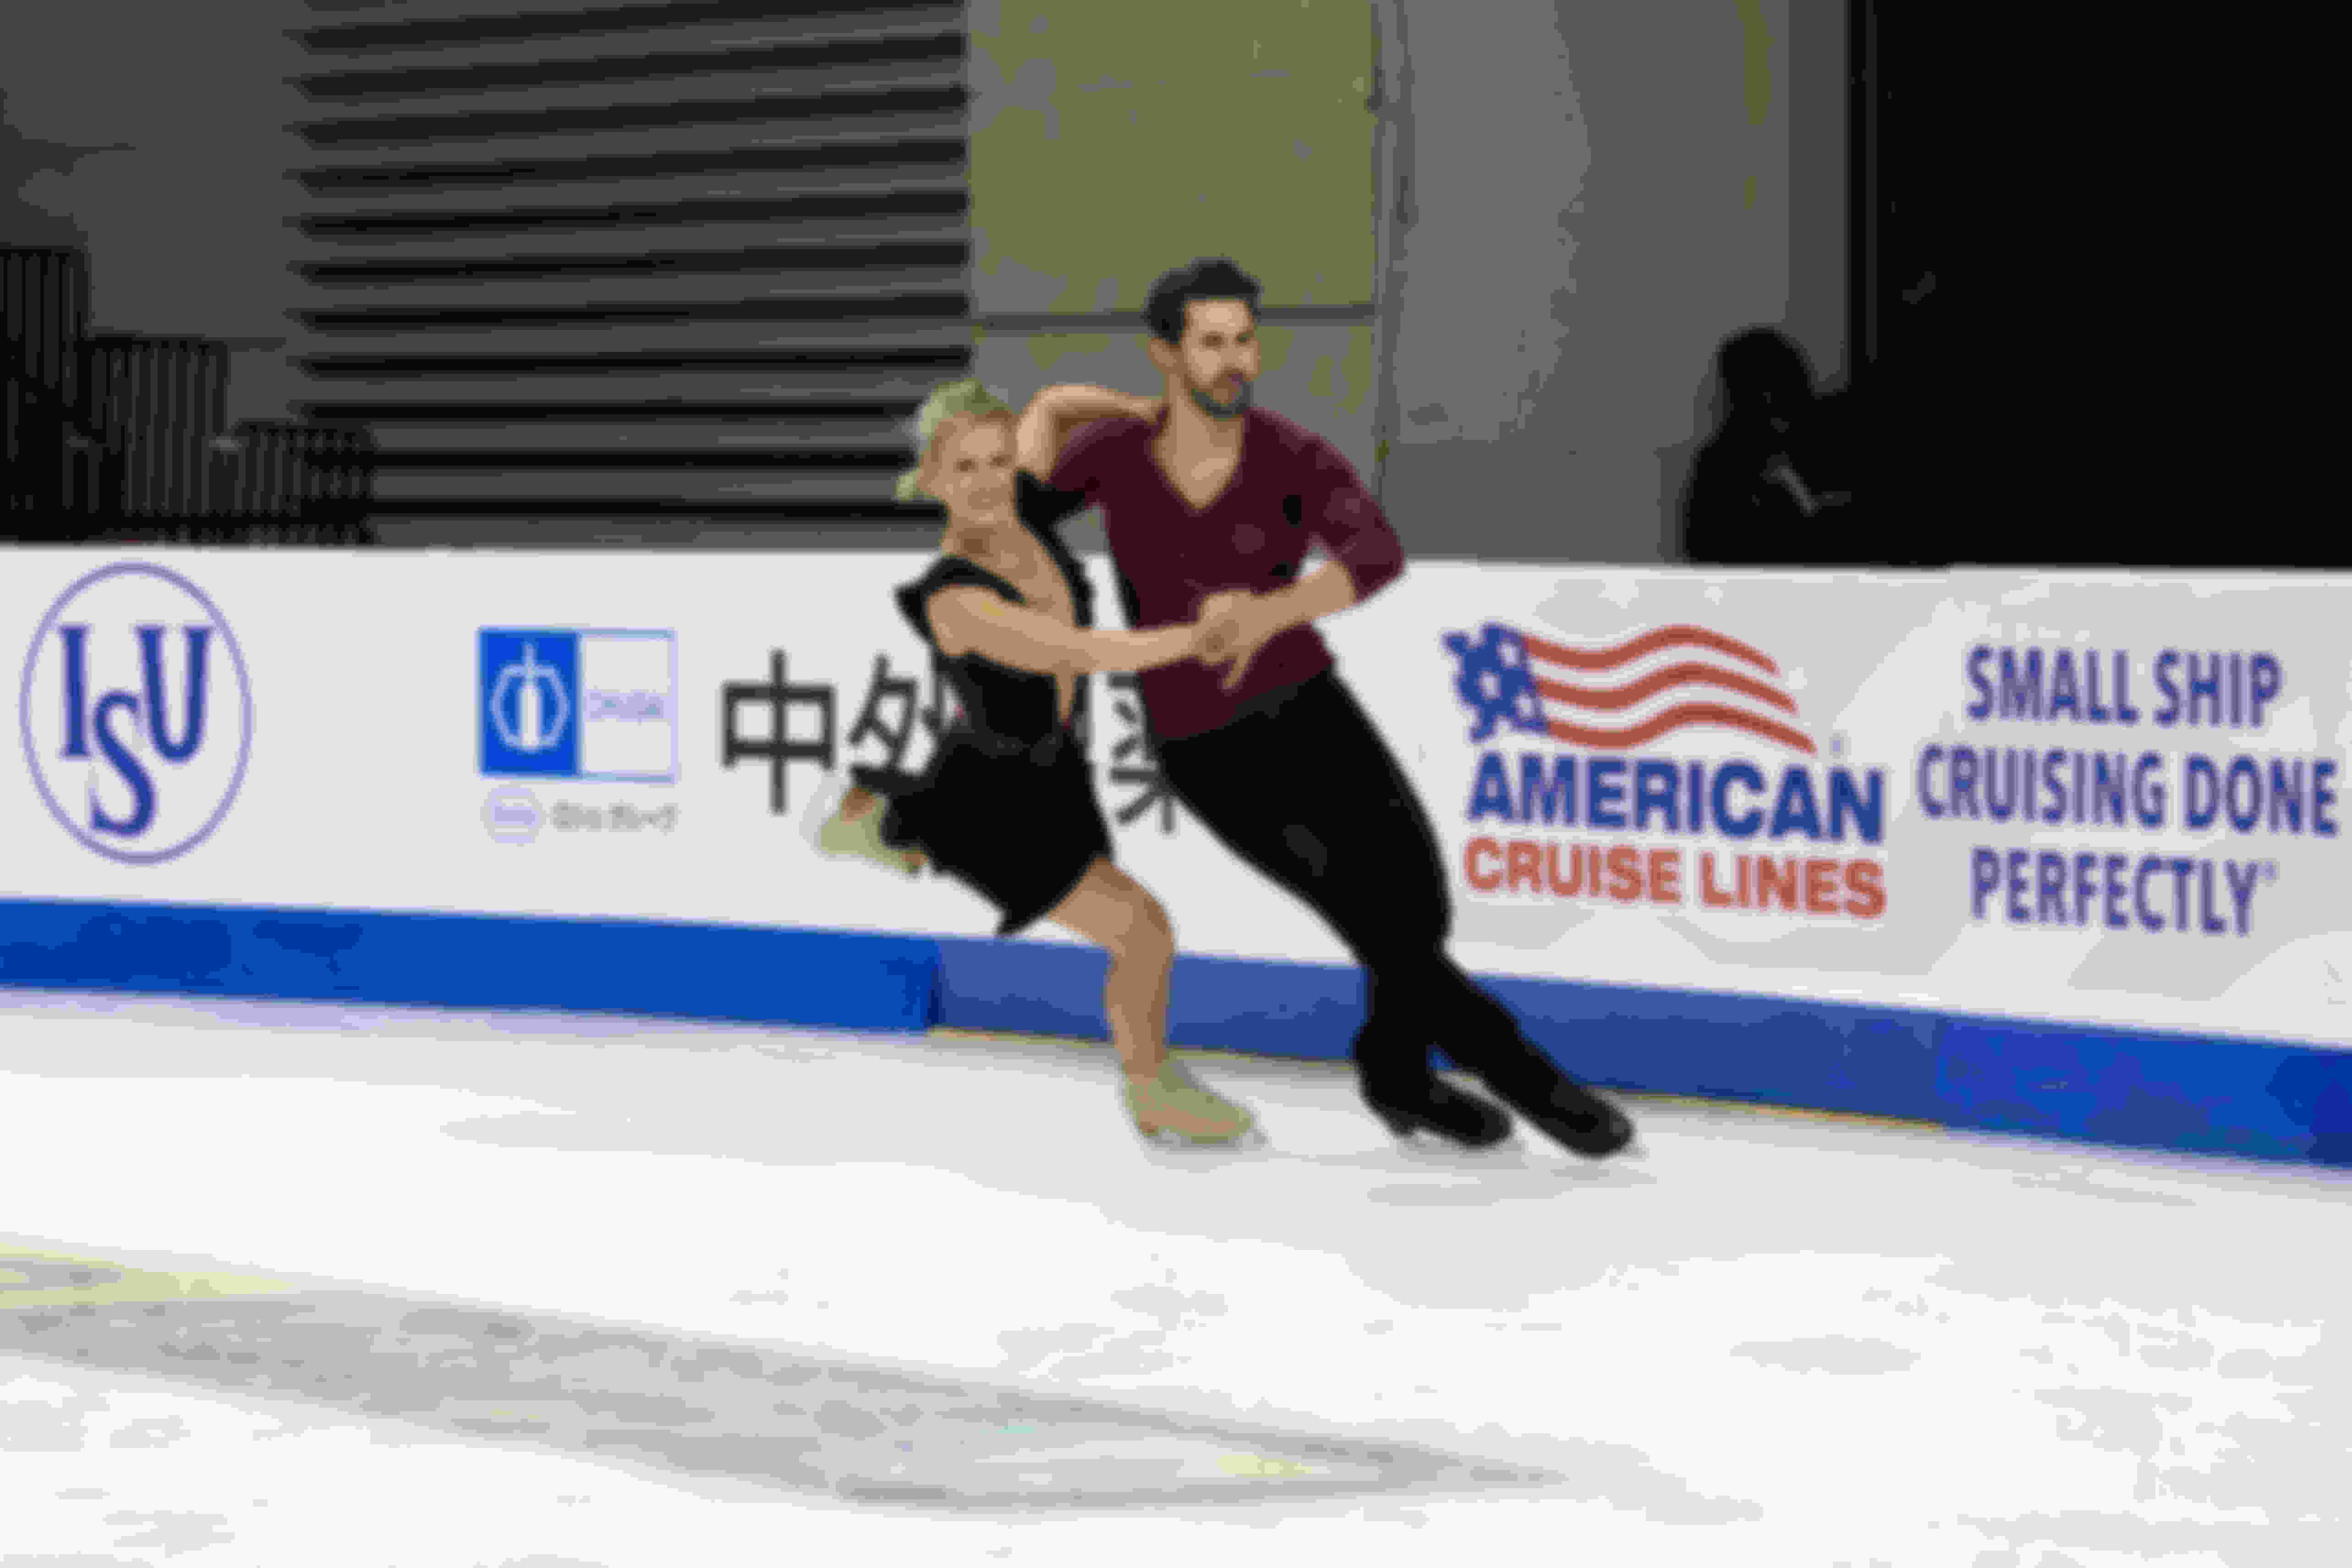 Madison Hubbell and Zachary Donohue are home hopefuls at Skate America